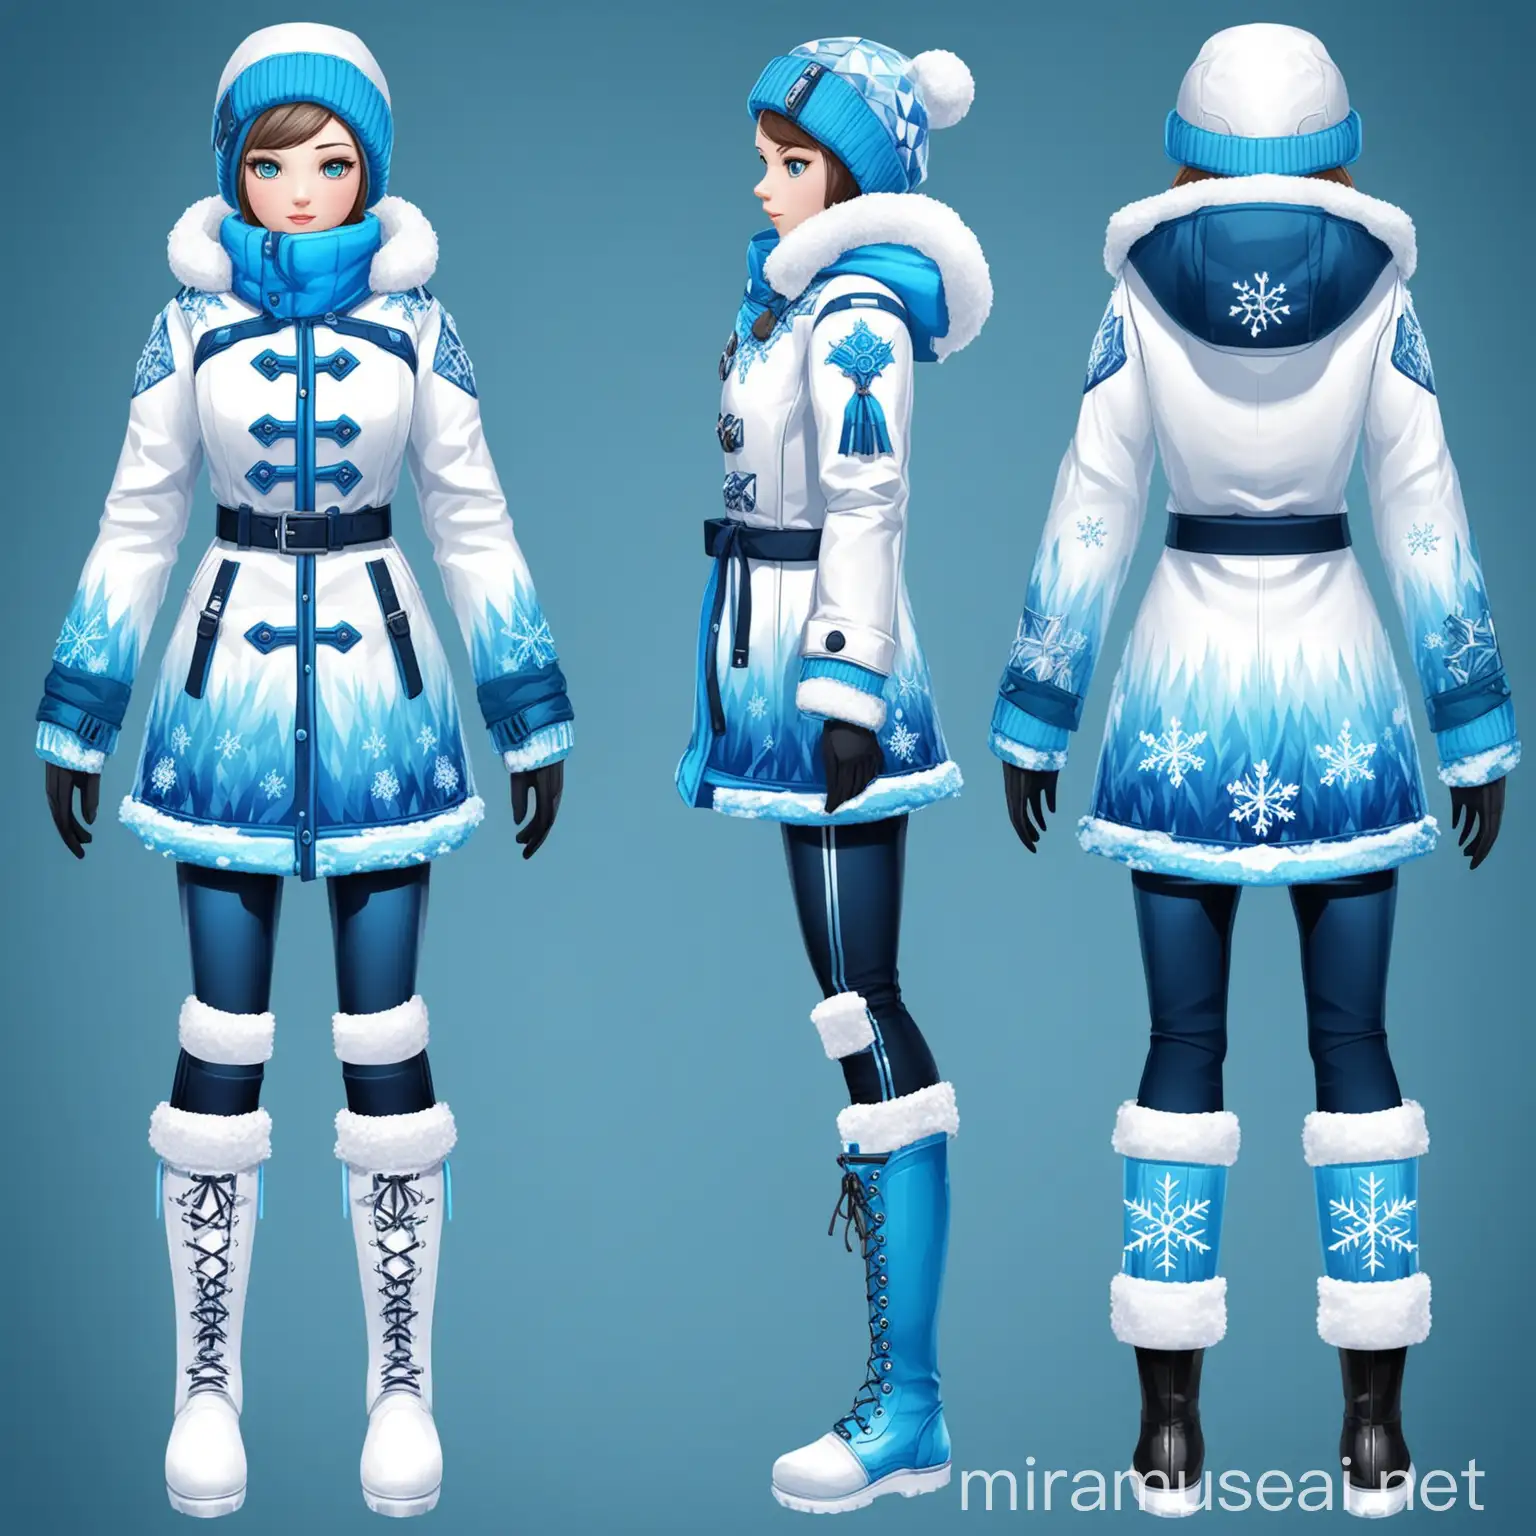 Winter Wonderland Game Outfit Snow and Ice Themed Attire for Adventurous Play